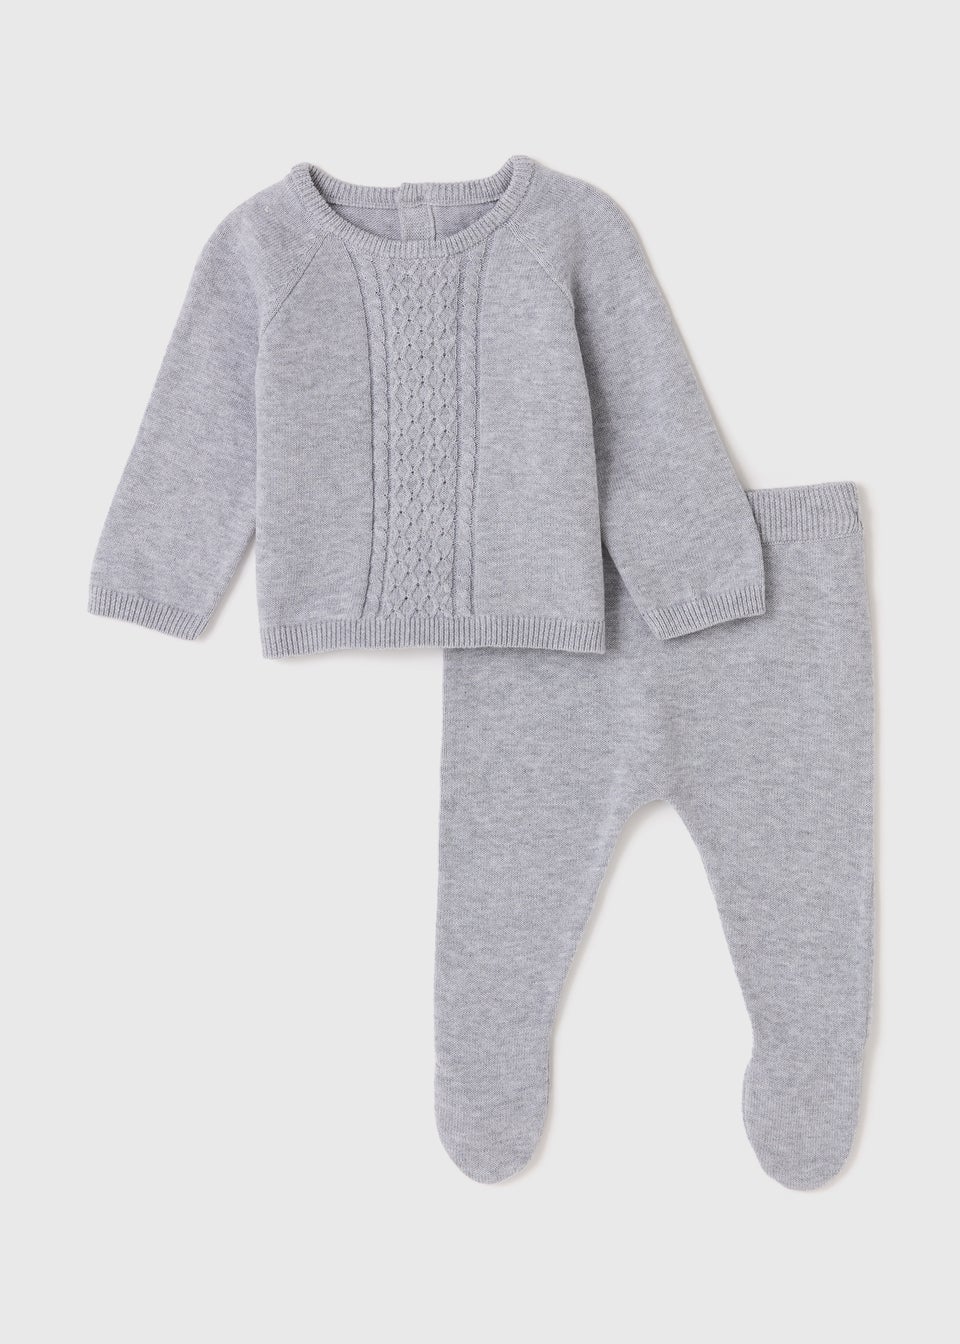 Baby 2 Pack Grey Knitted Set (Tiny Baby-12mths)